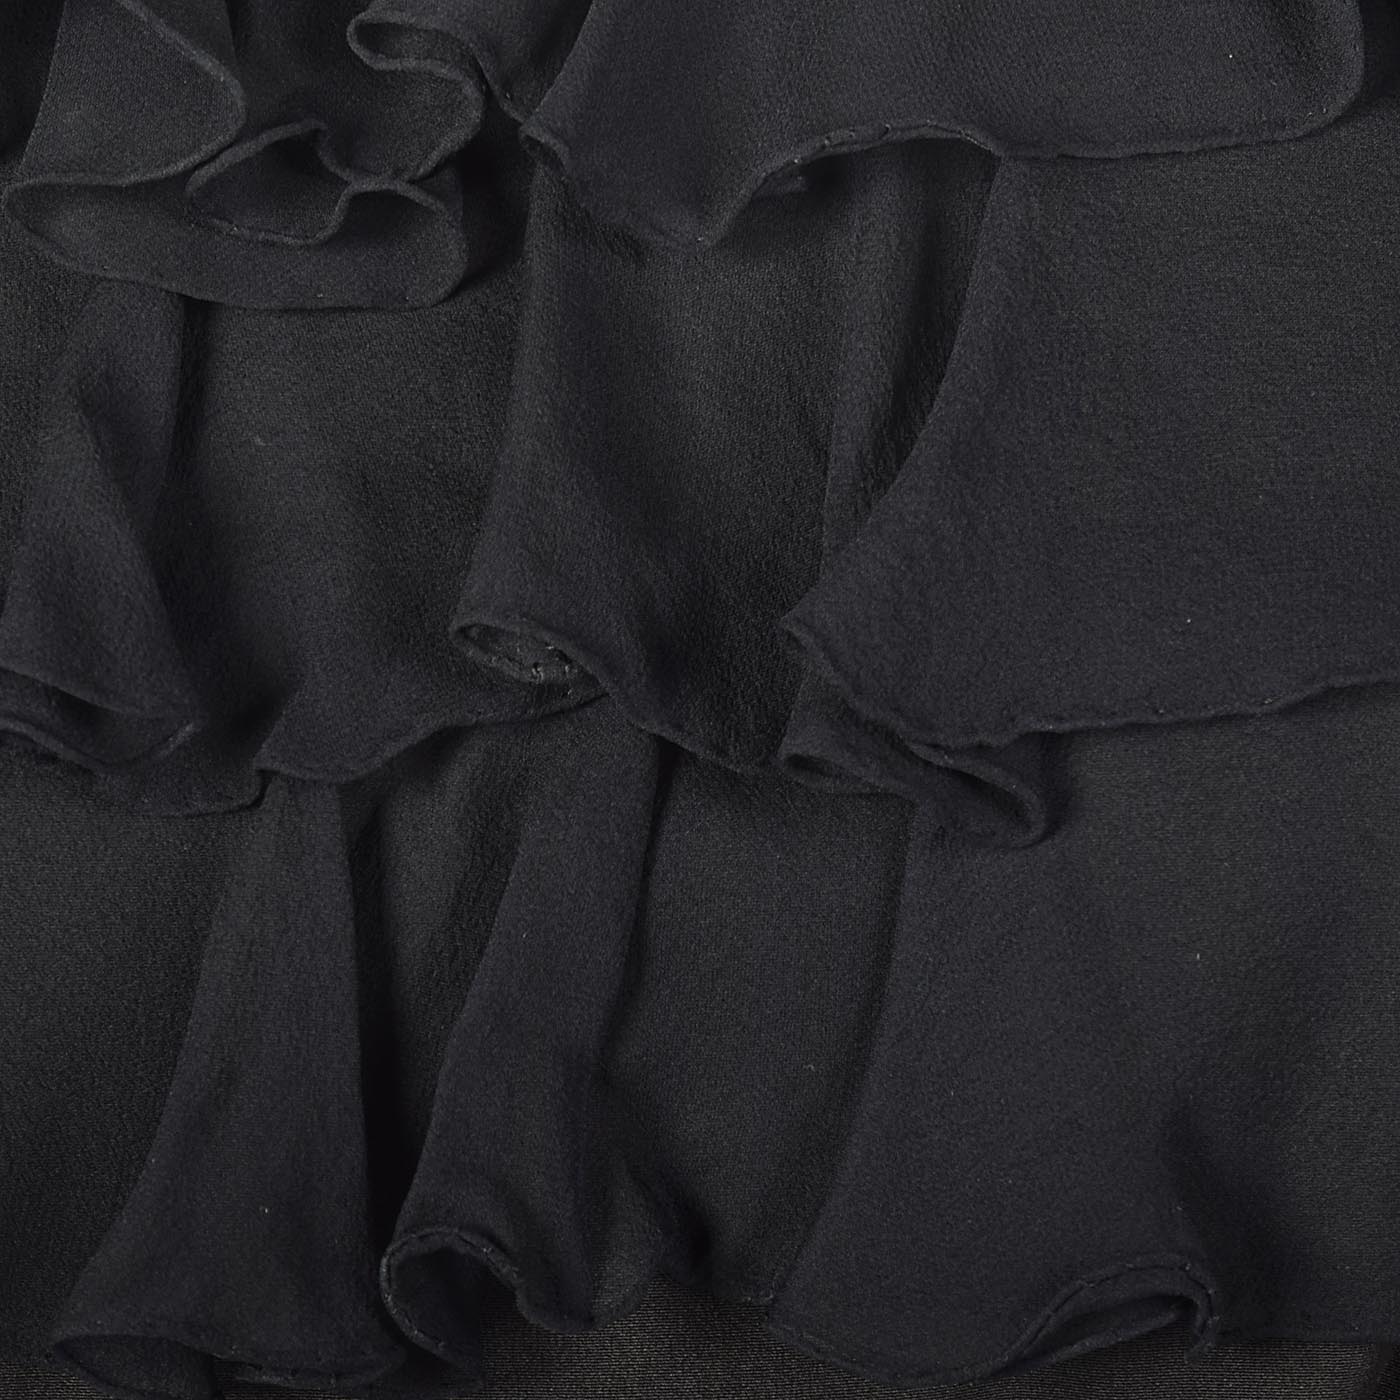 1940s Black Cocktail Dress with Chiffon Bust